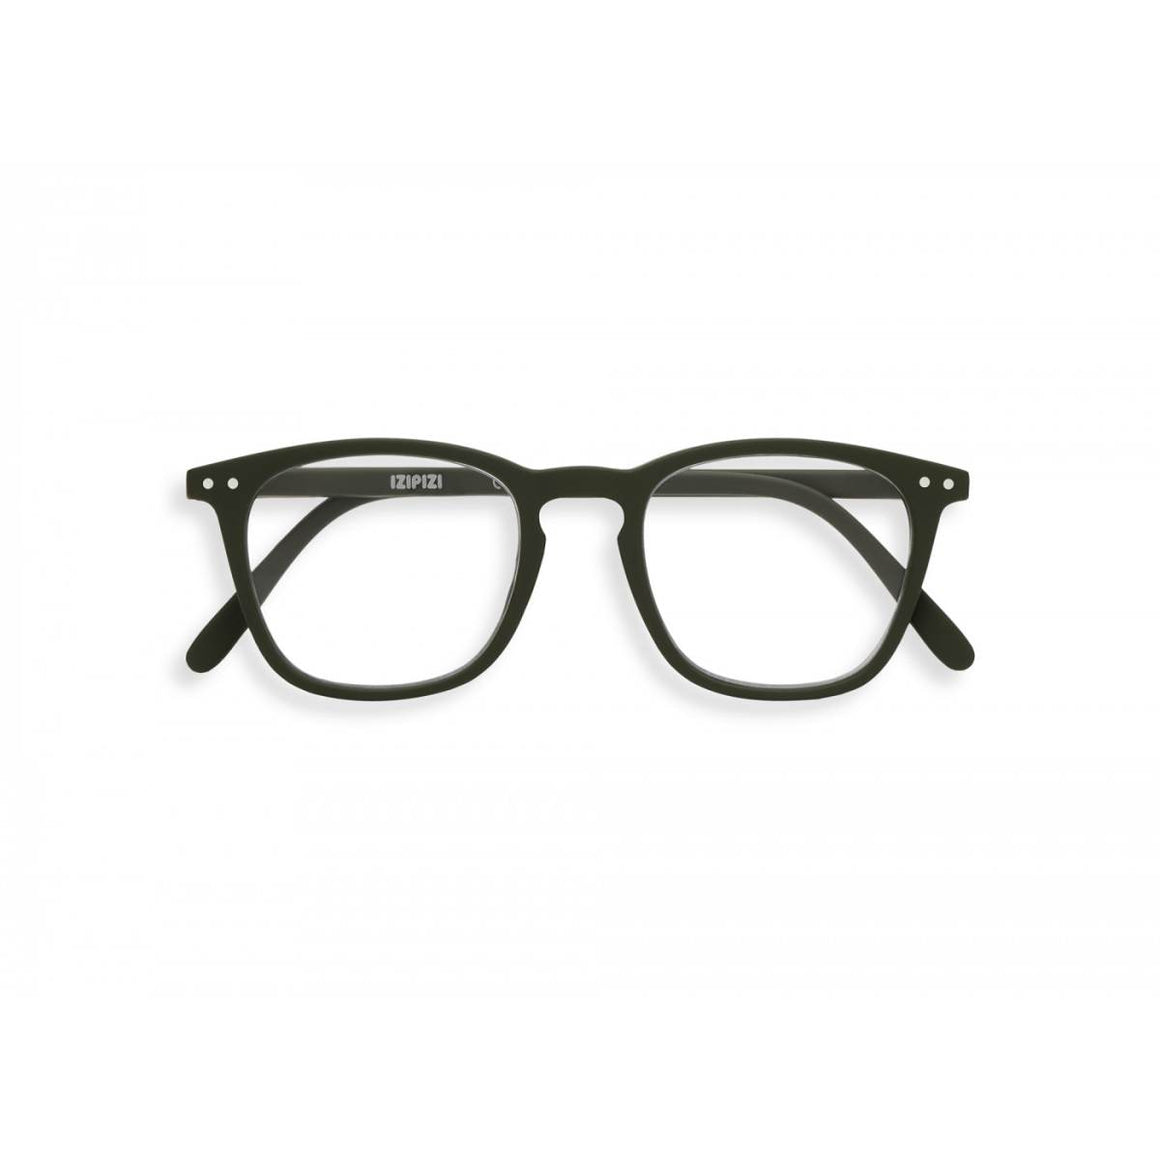 A khaki green pair of magnifying reading glasses. The frames are a large, structured, trapezium shape.